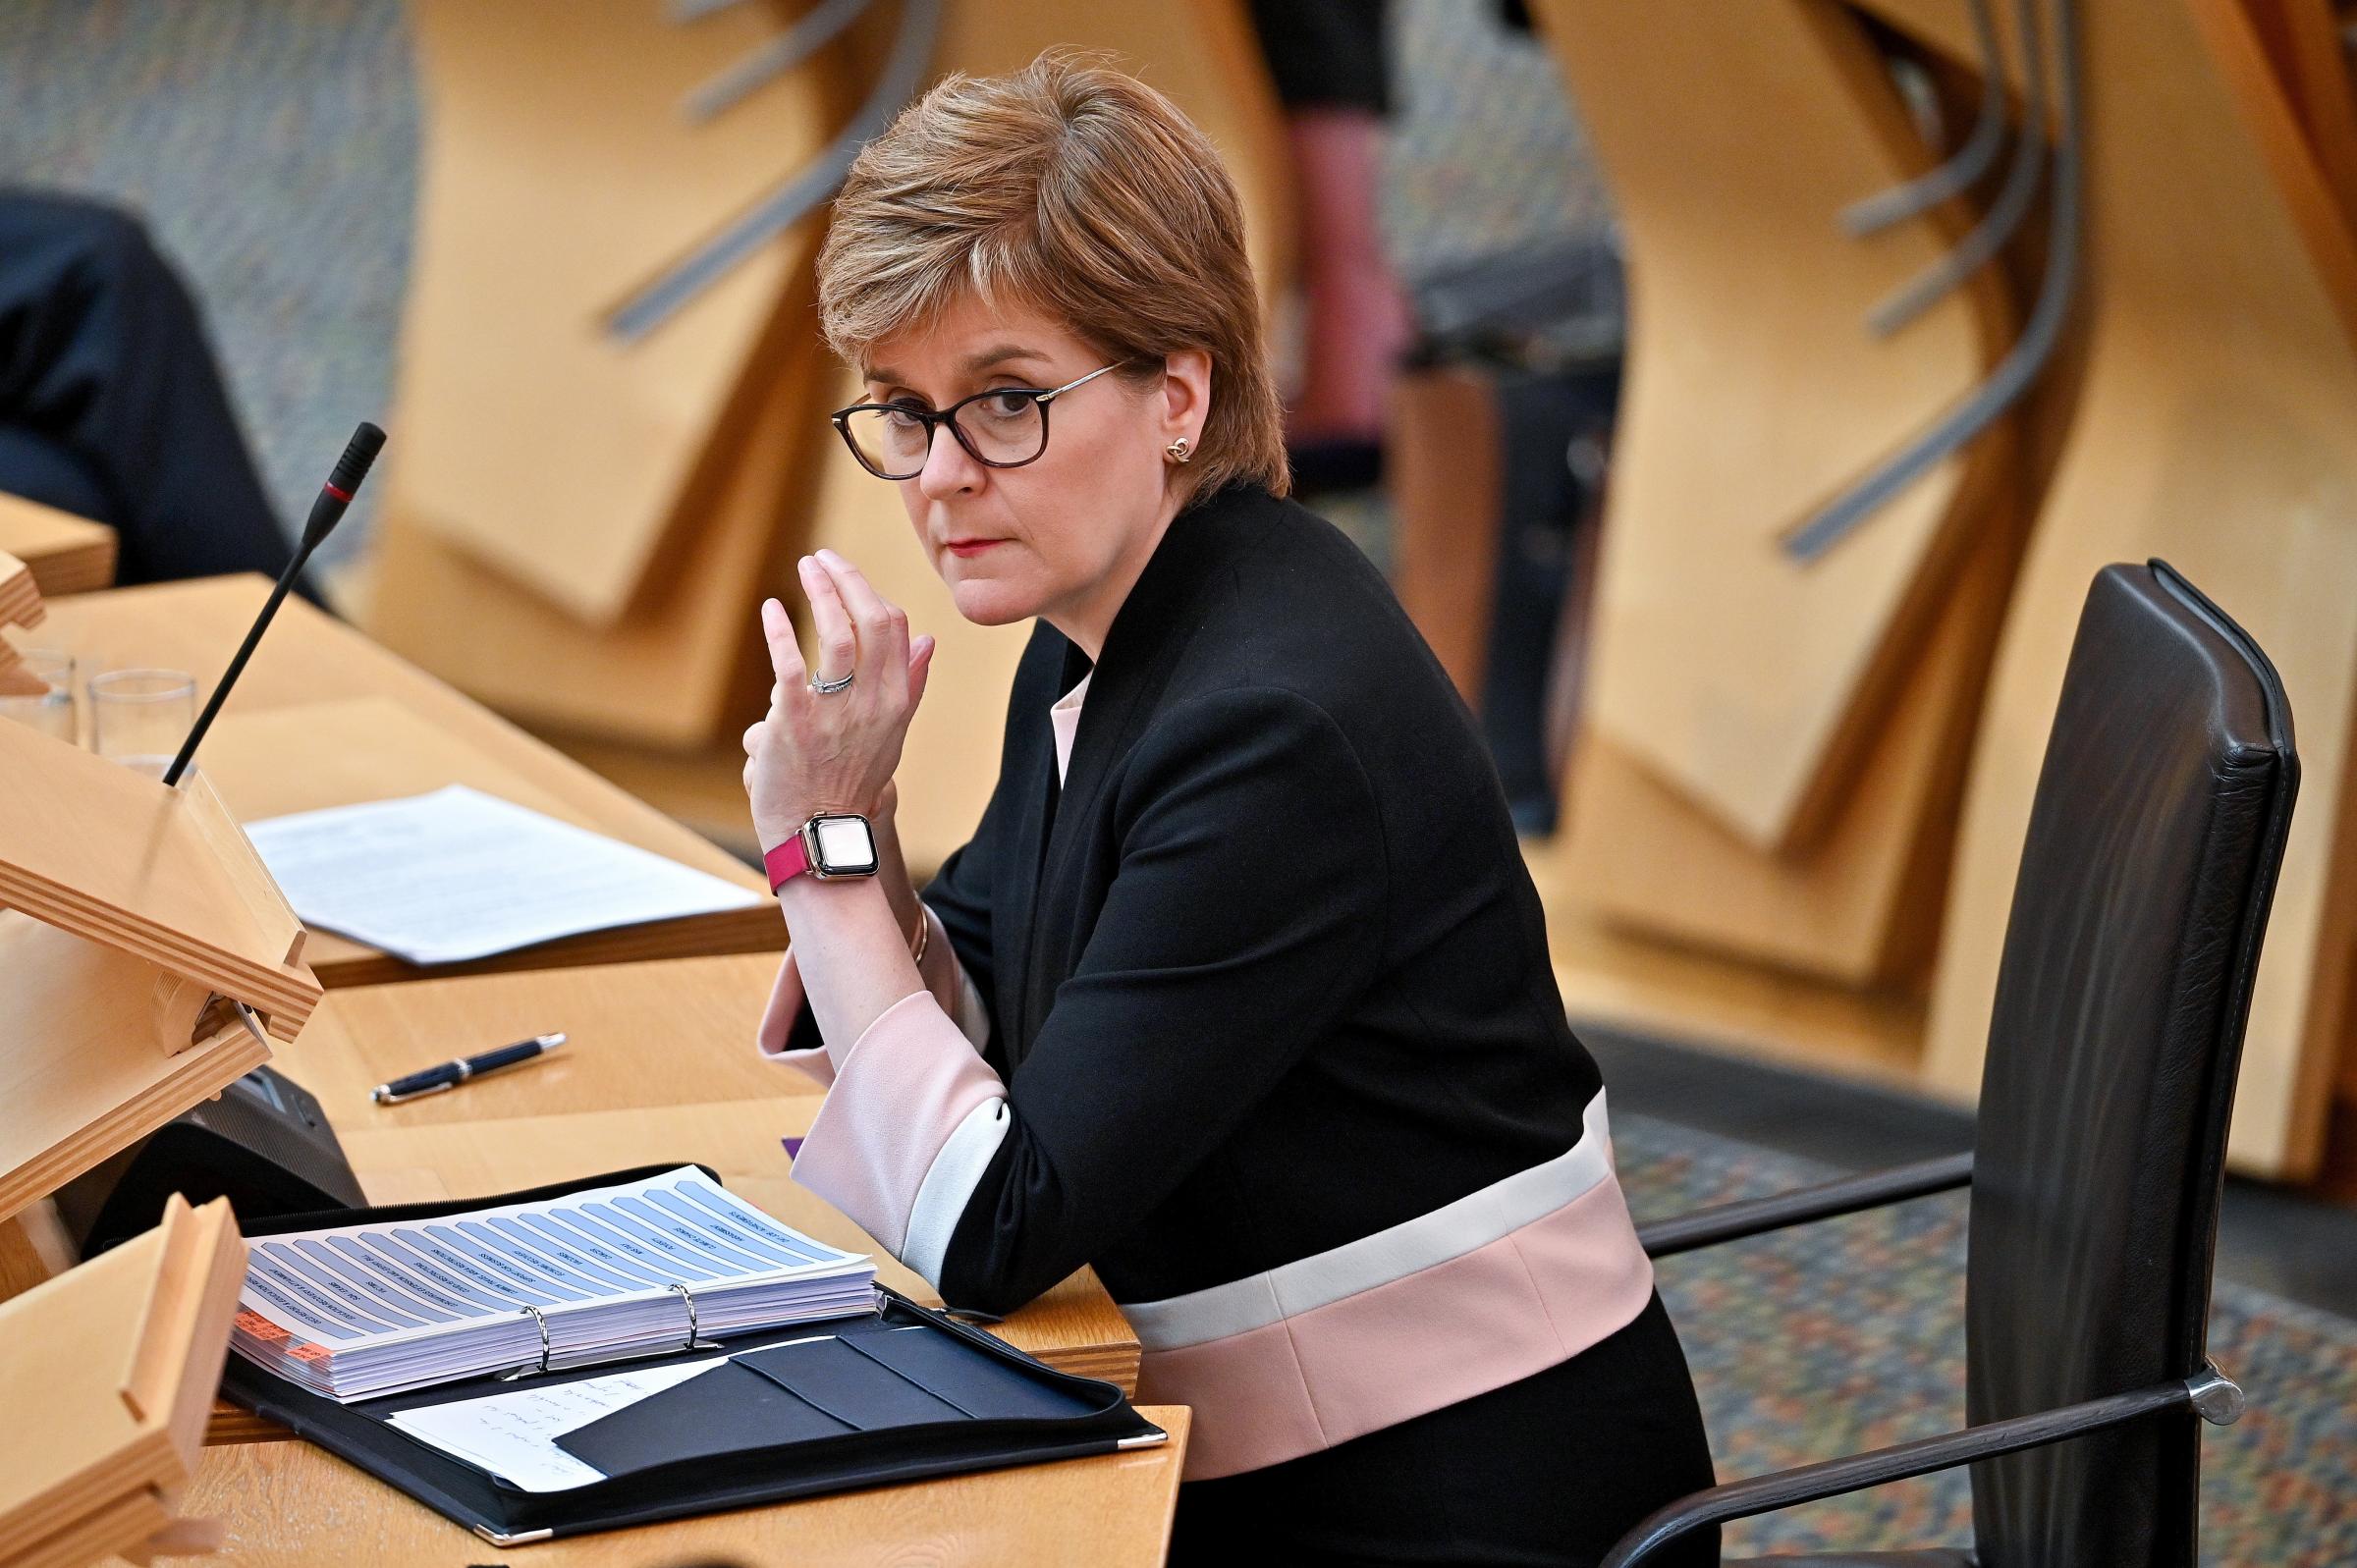 Nicola Sturgeon Covid update: What did today's announcement say?